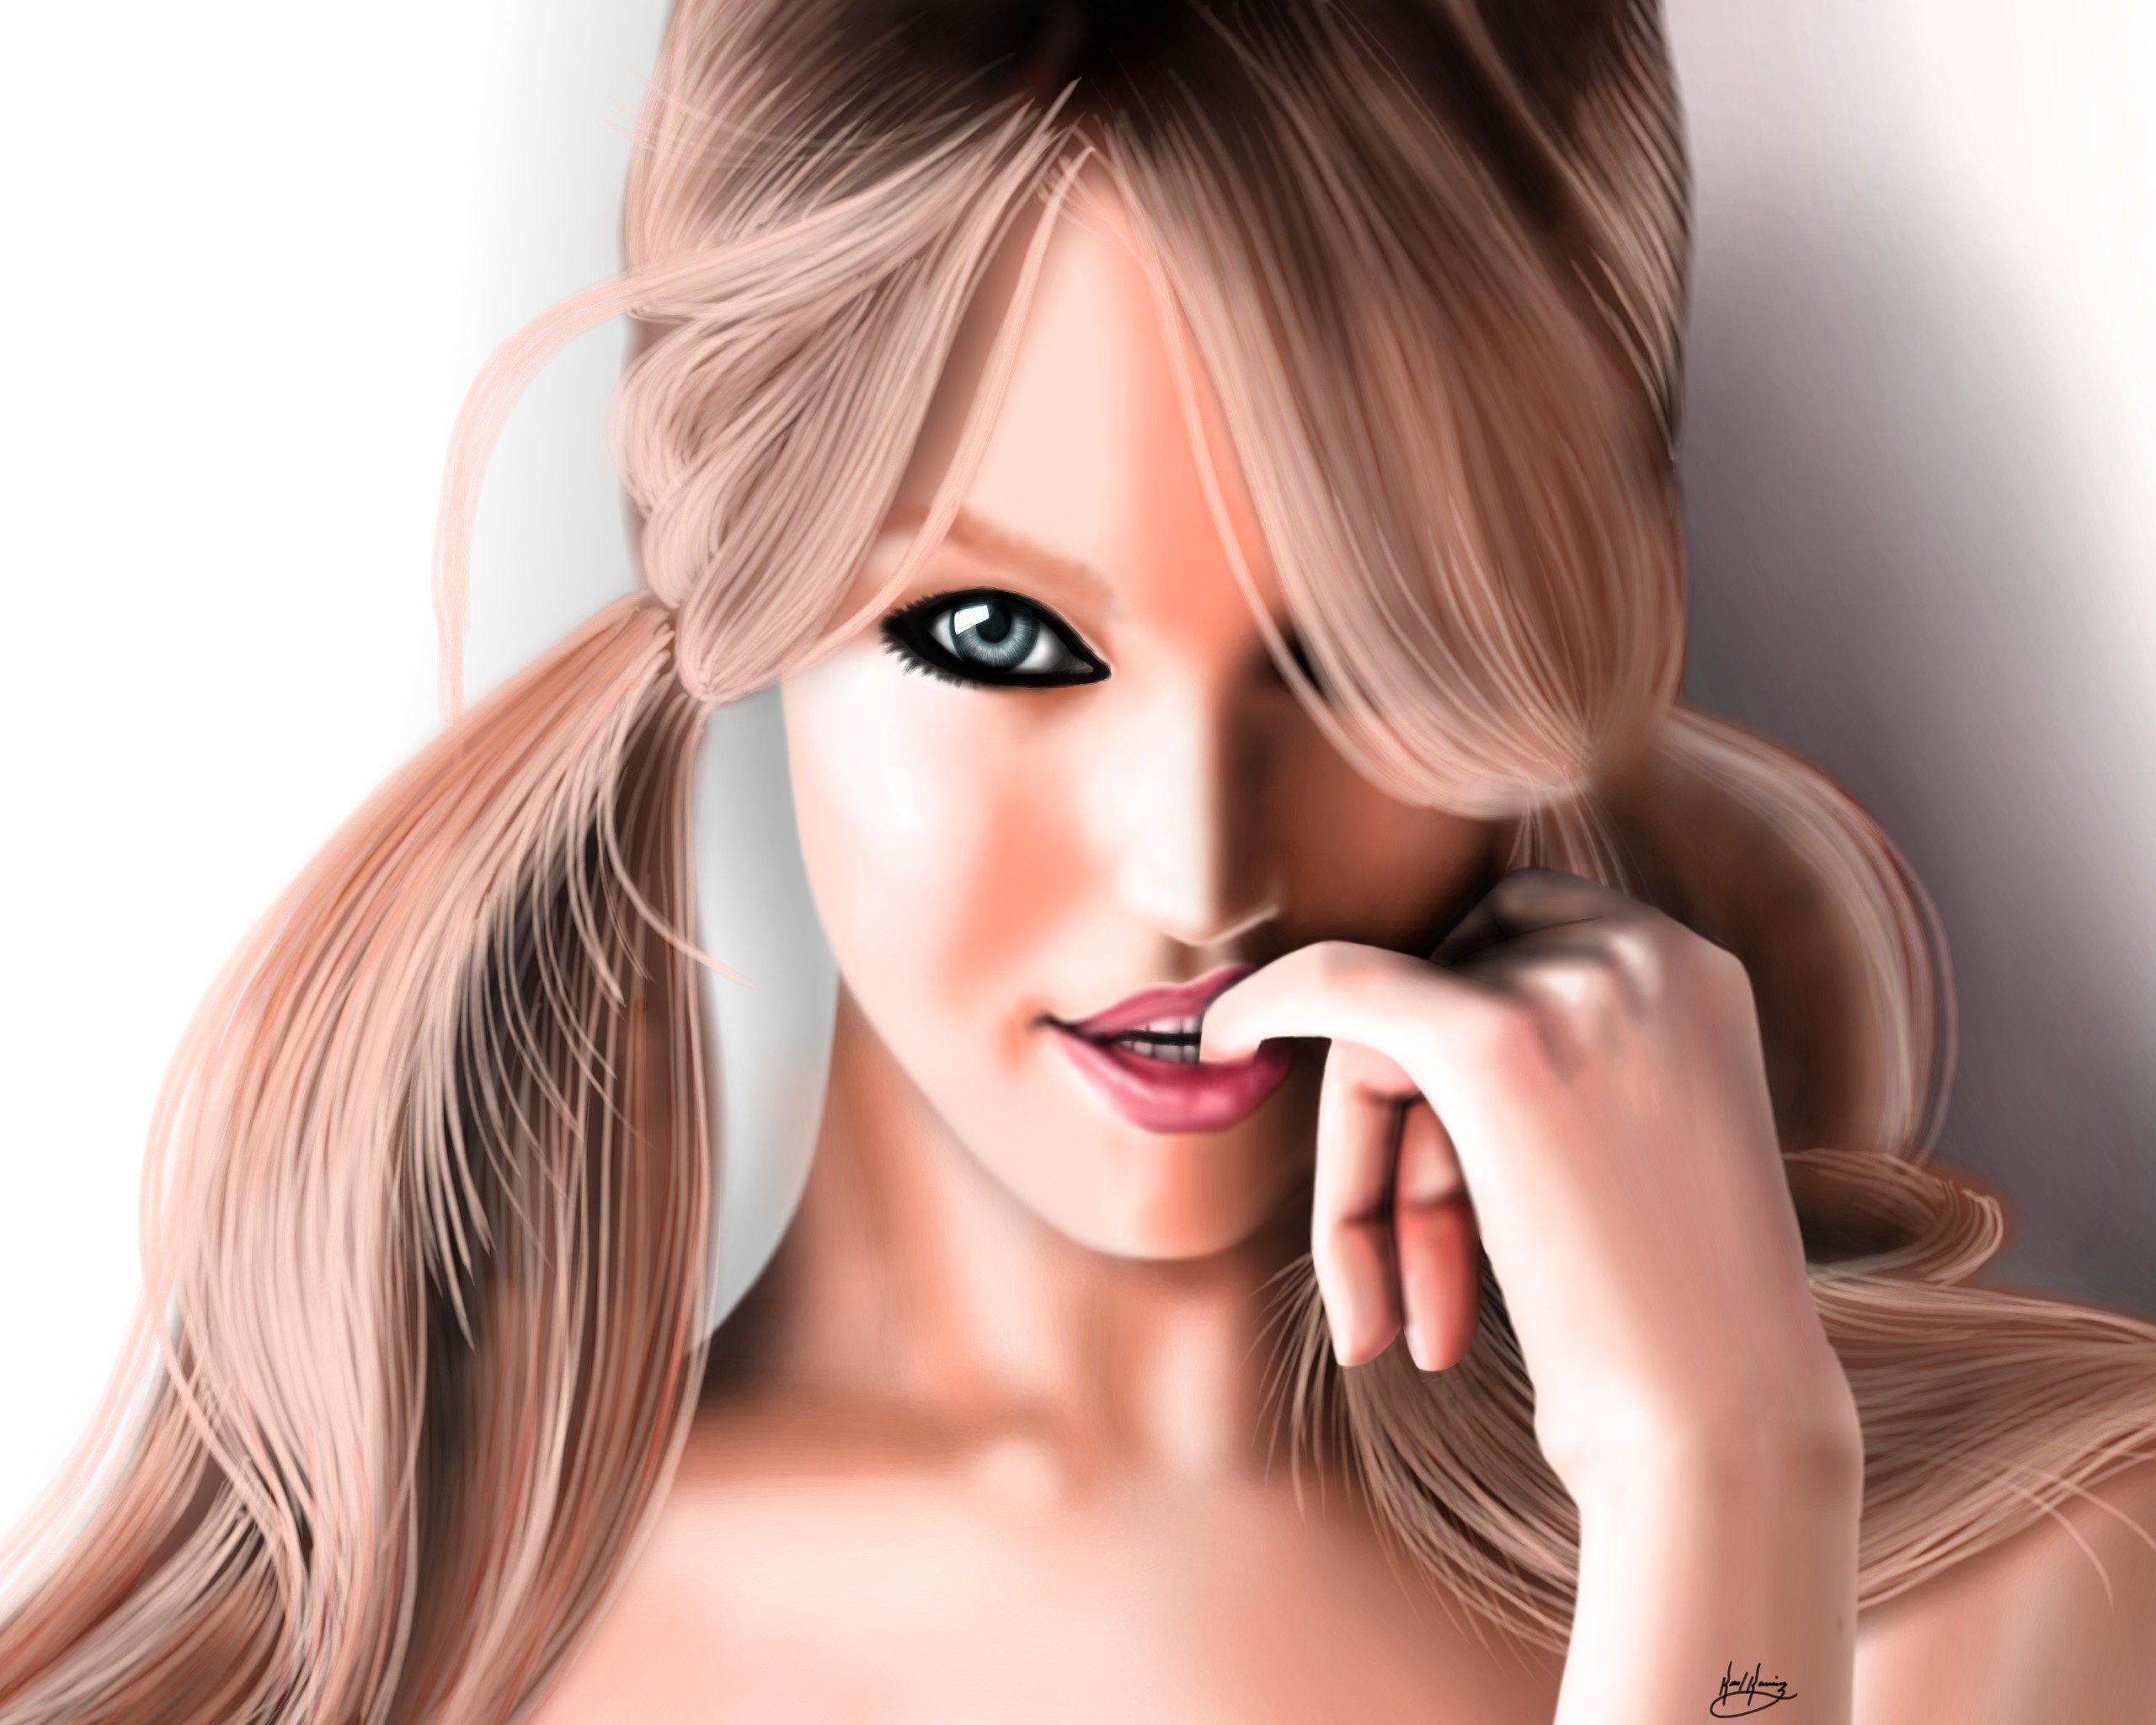 My newest drawing Seductive eyes. Check out the video...